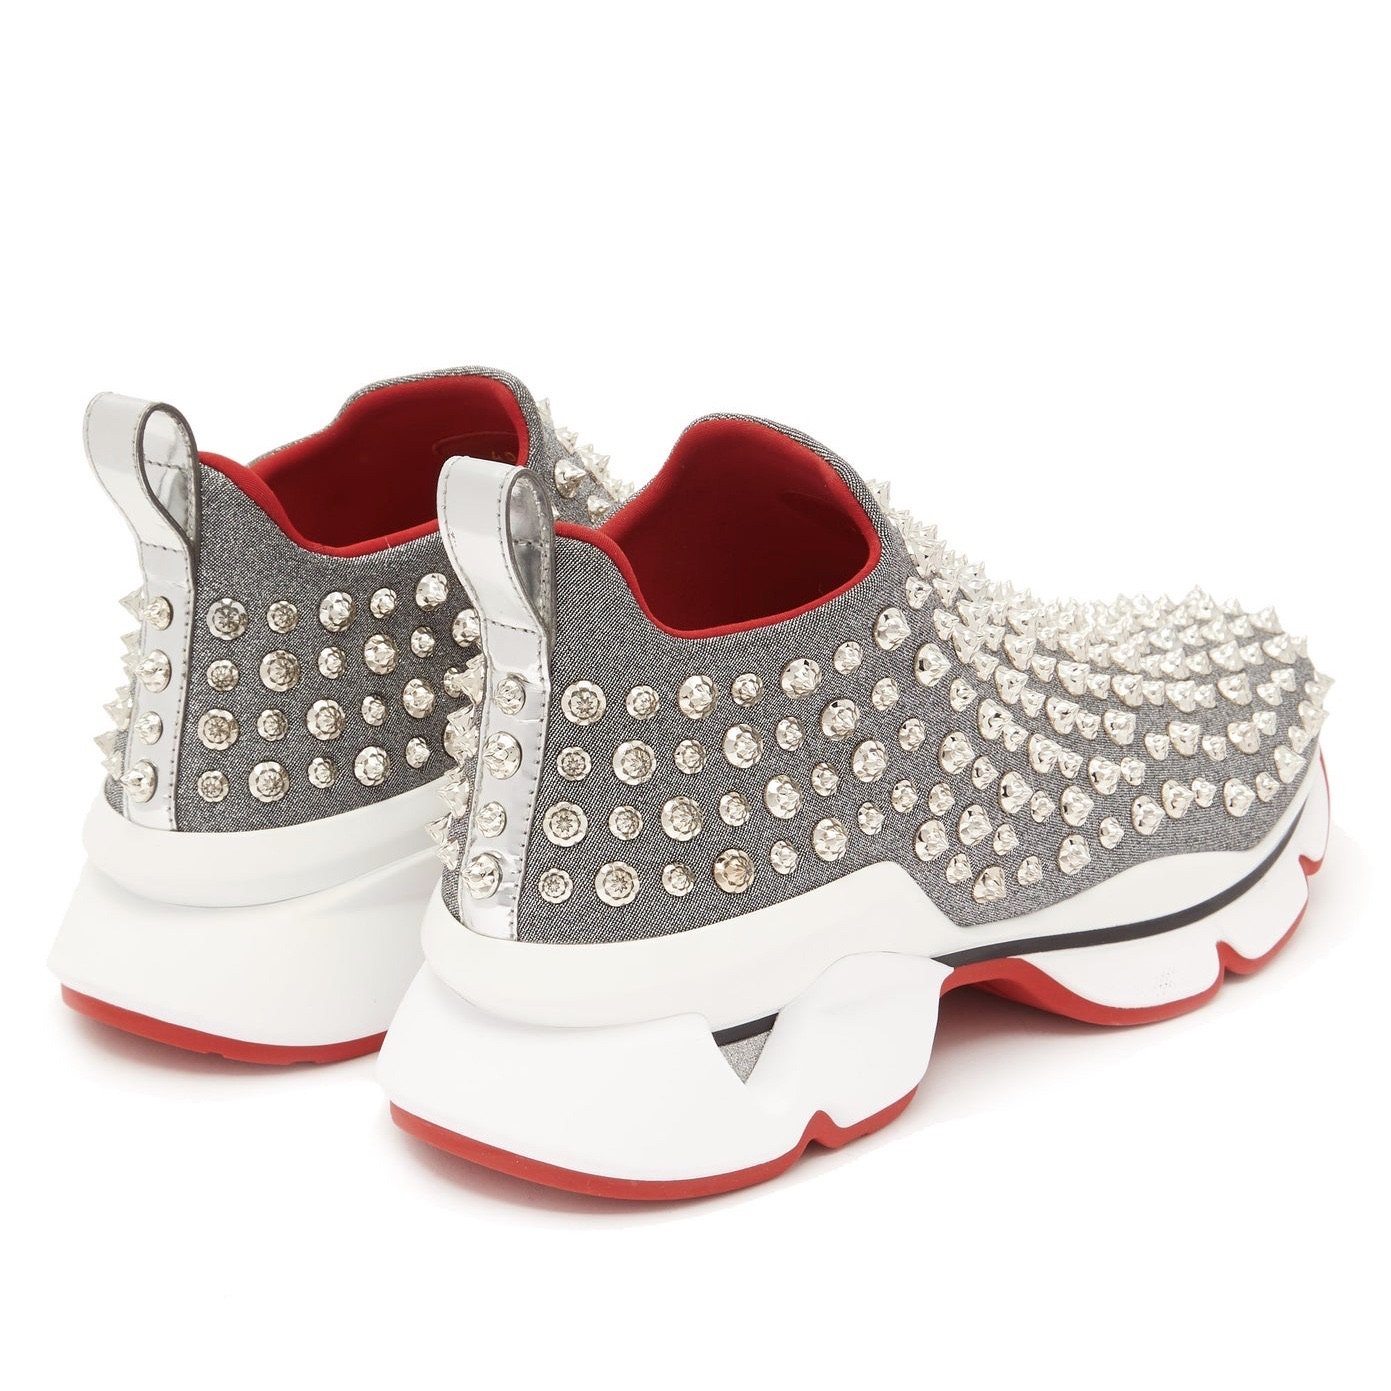 woman louboutin sneakers outfit